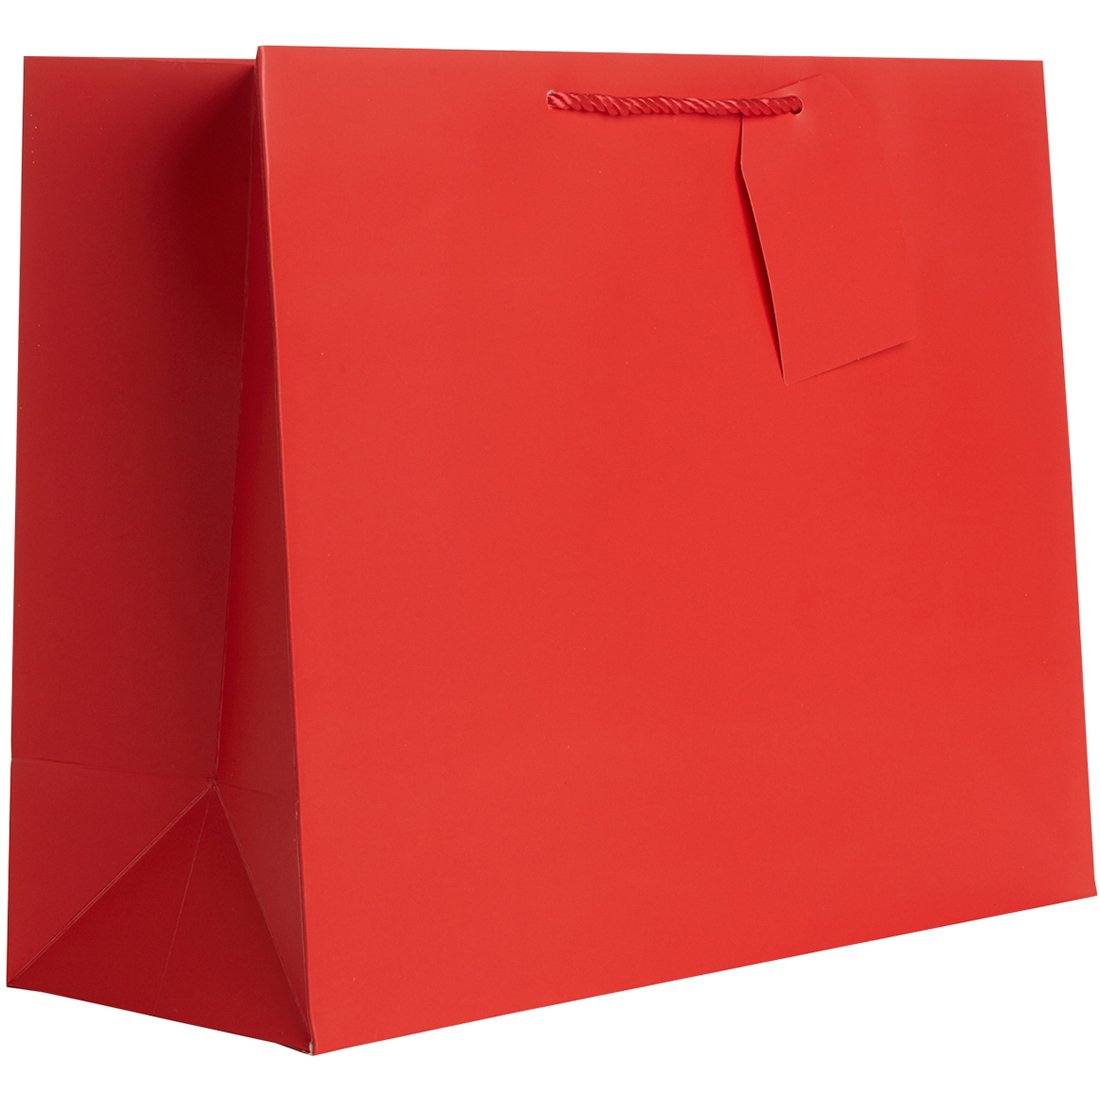 Heavyweight Solid Color Large Jumbo Gift Bags, Matte Red